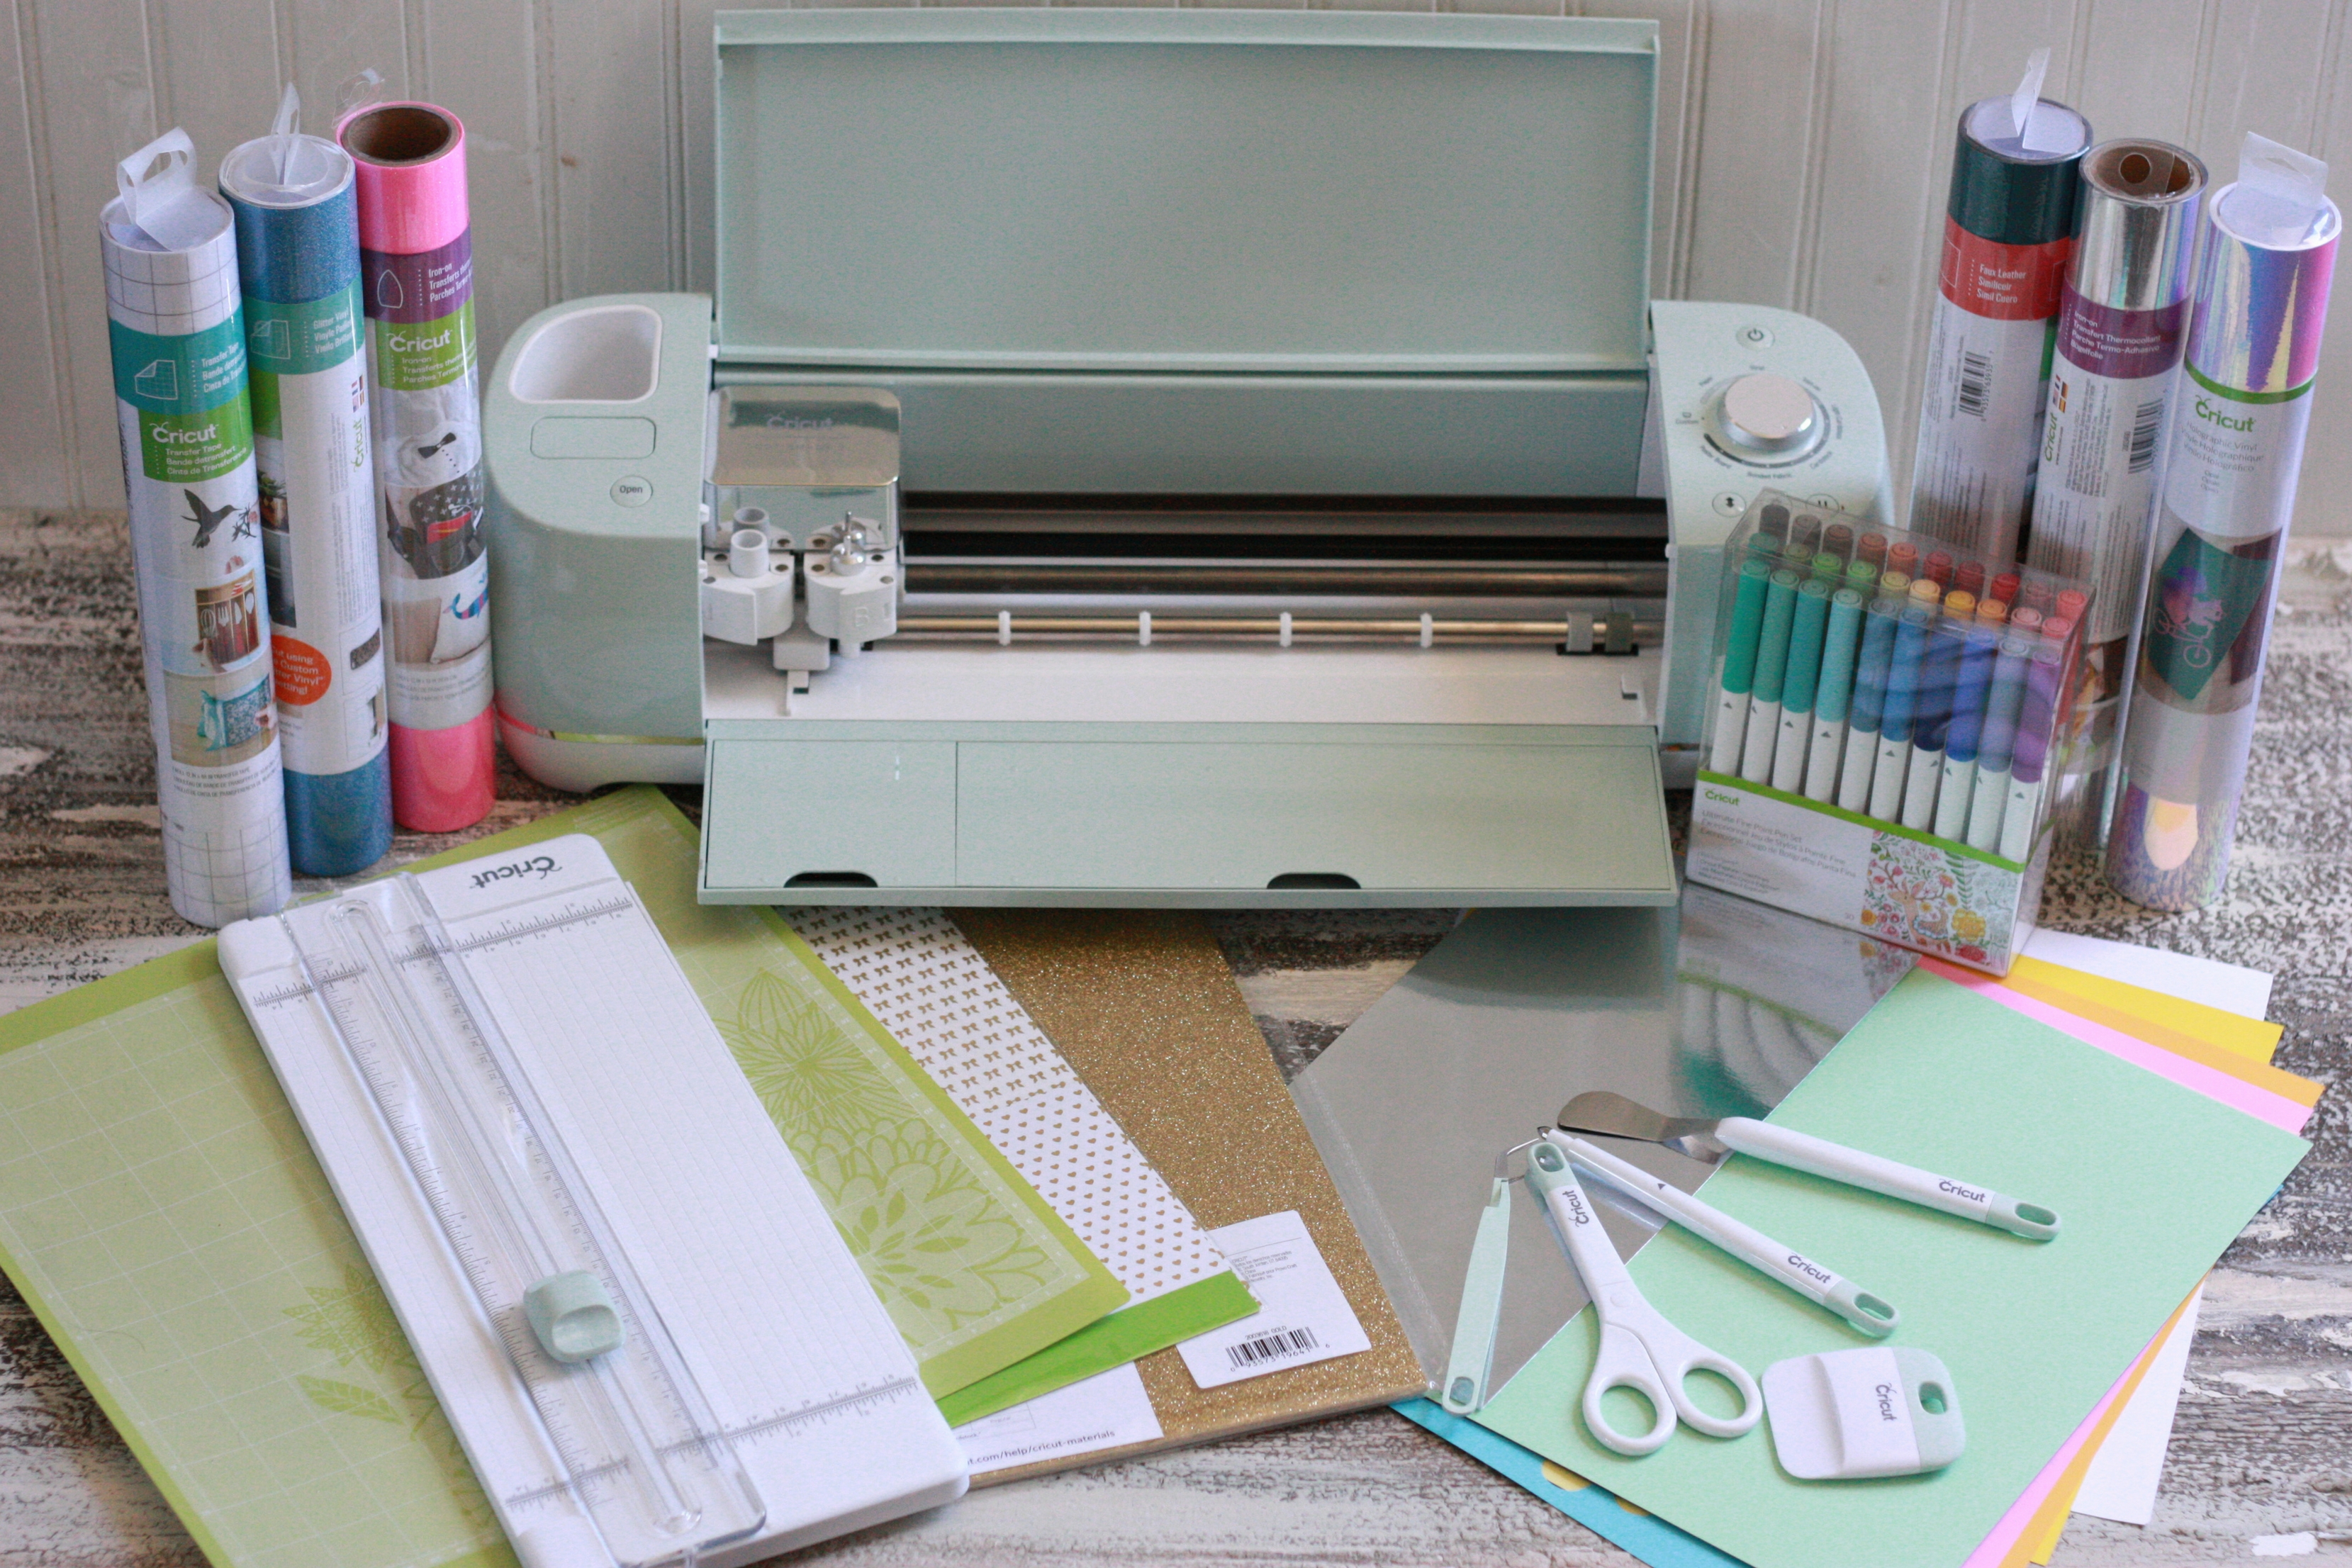 HOW IS THE CRICUT EXPLORE AIR 2 DIFFERENT FROM OTHER CUTTING MACHINES?